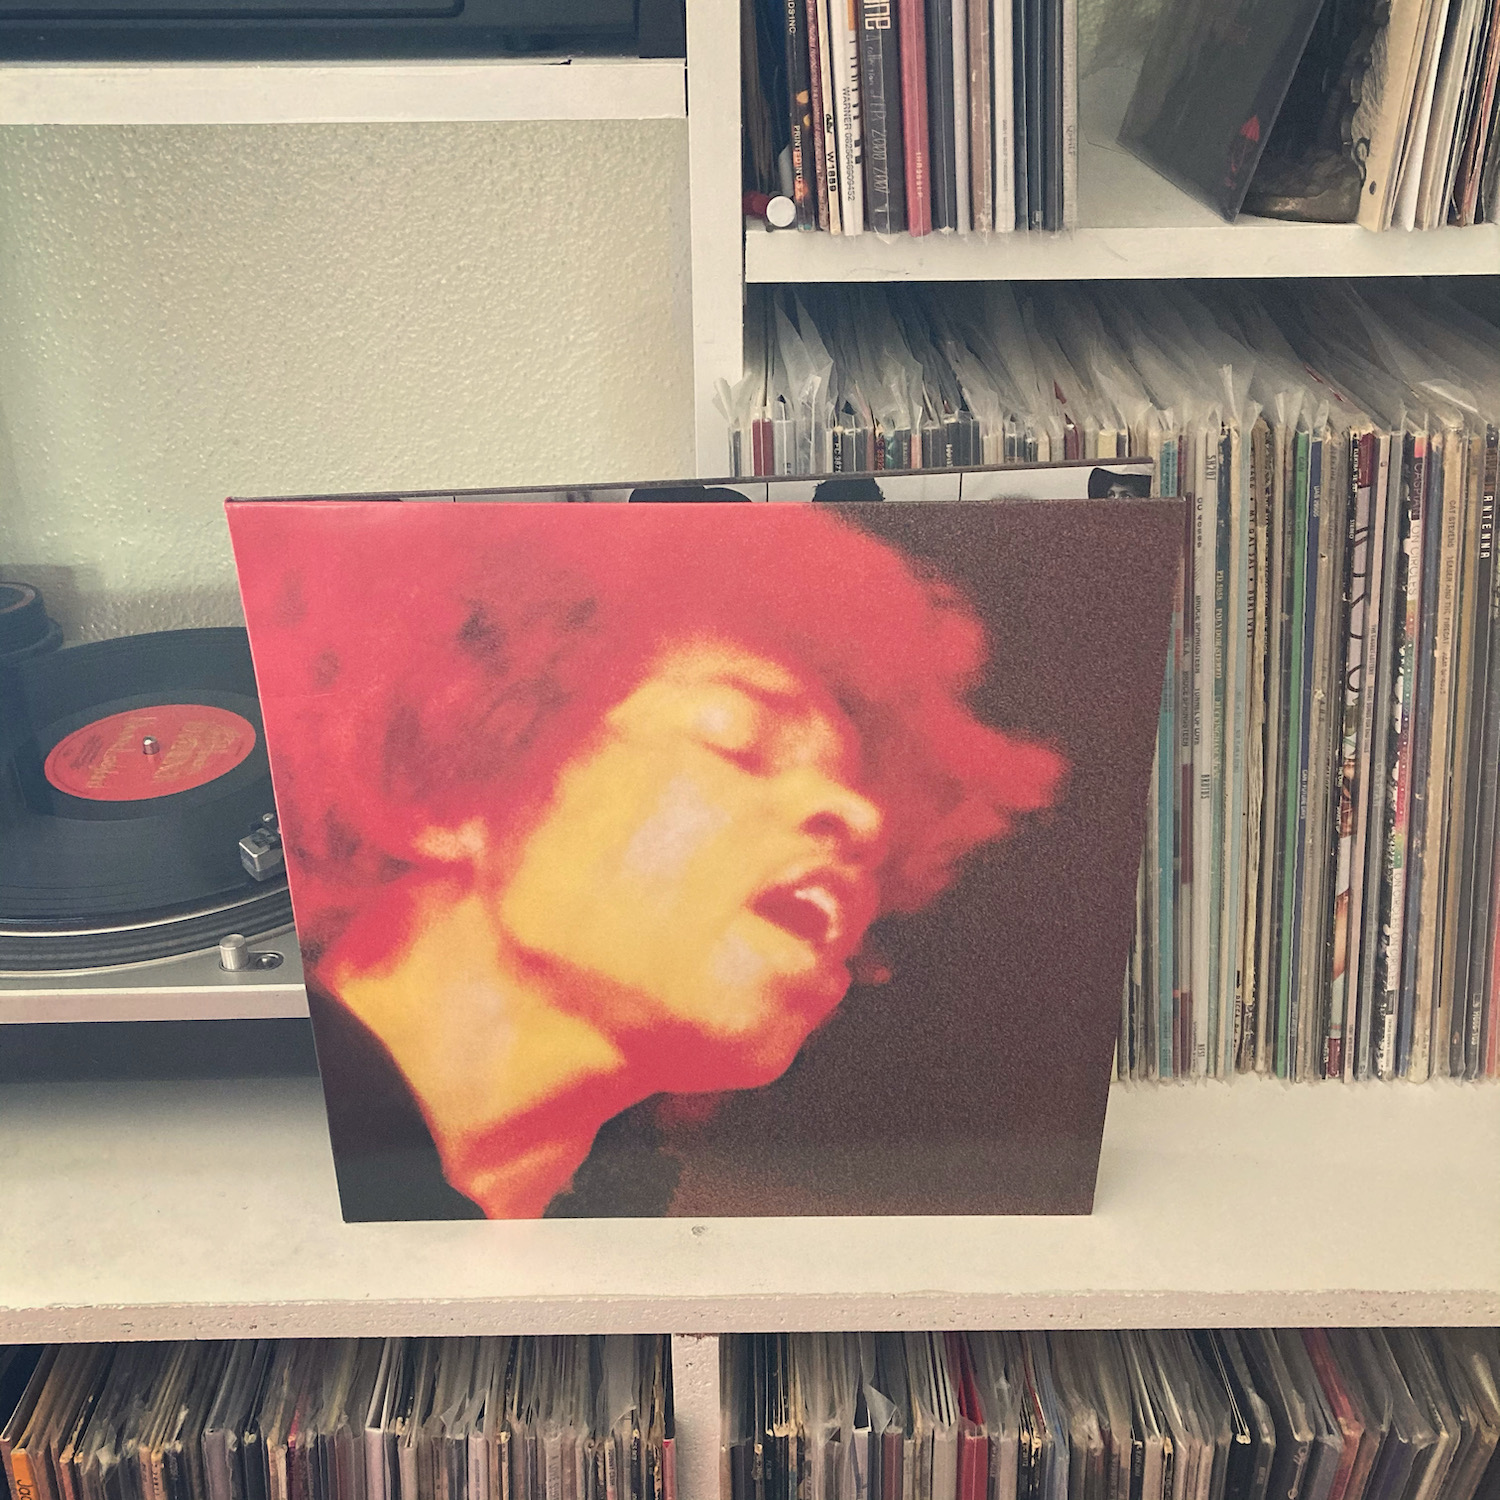 jimi hendrix experience electric ladyland